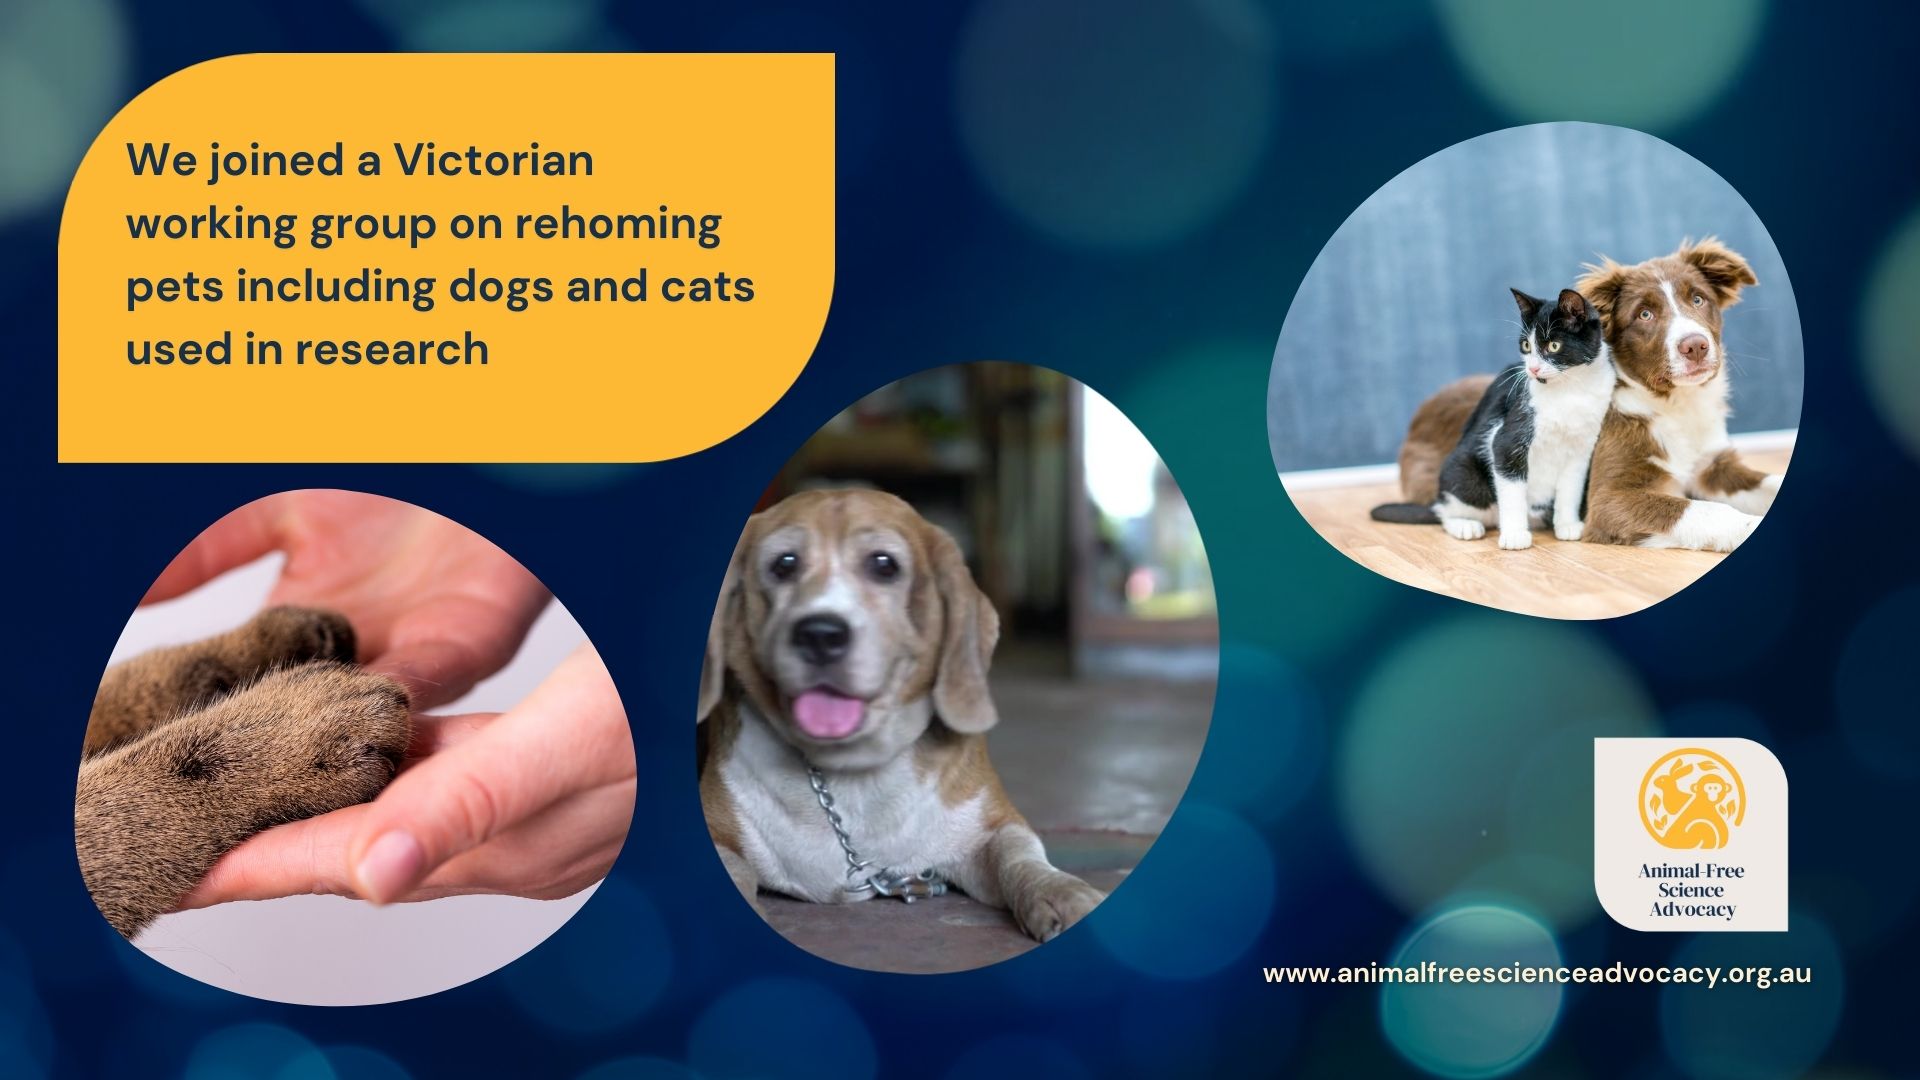 Rehoming animals from labs | Animal-Free Science Advocacy | 2023 Achievements